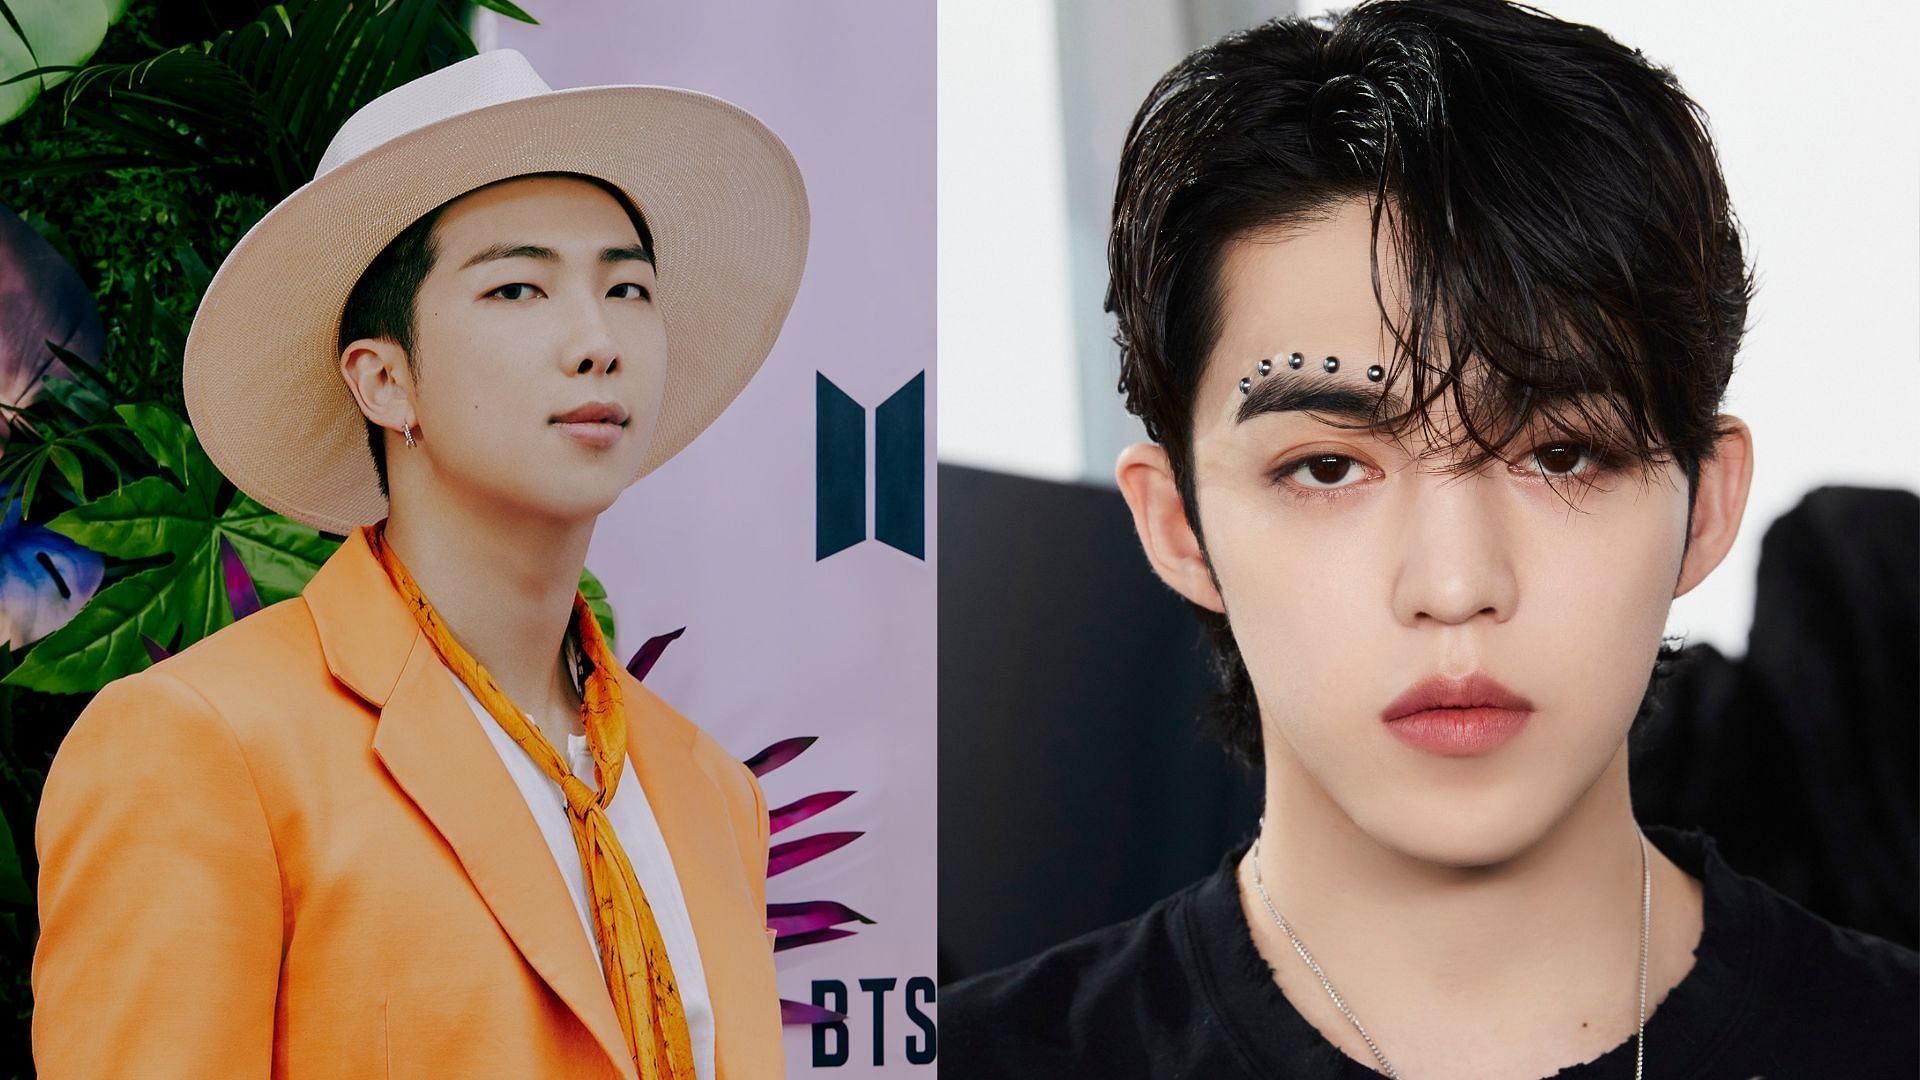 Top 5 male K-pop group leaders: SVT's S.COUPS, BTS' RM